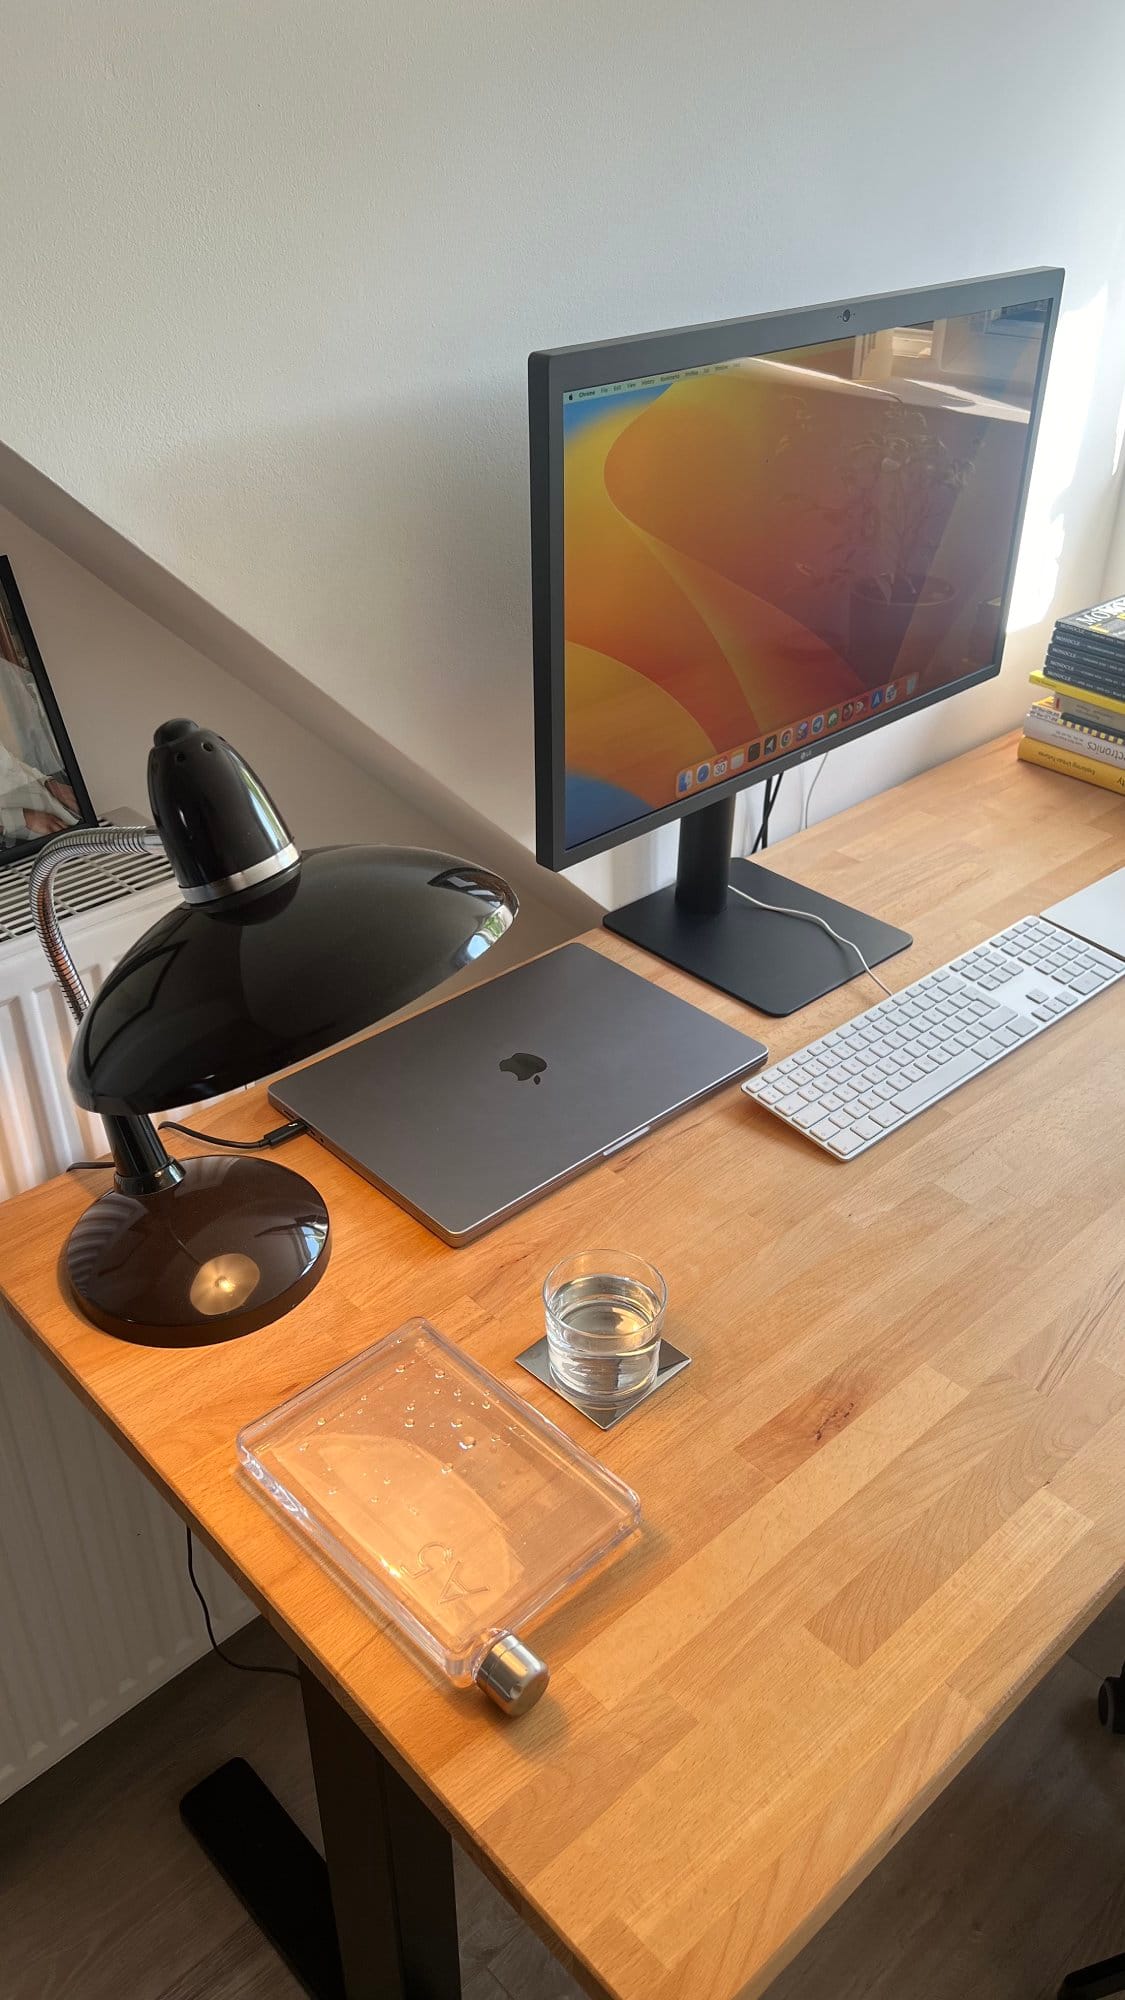 A well-organised home office desk setup featuring an LG UltraFine 5K monitor displaying a macOS desktop, MacBook Pro M1 16″ 2021, Apple Magic Keyboard, black desk lamp, A5 water bottle by memobottle, glass of water on a coaster, and a stack of books